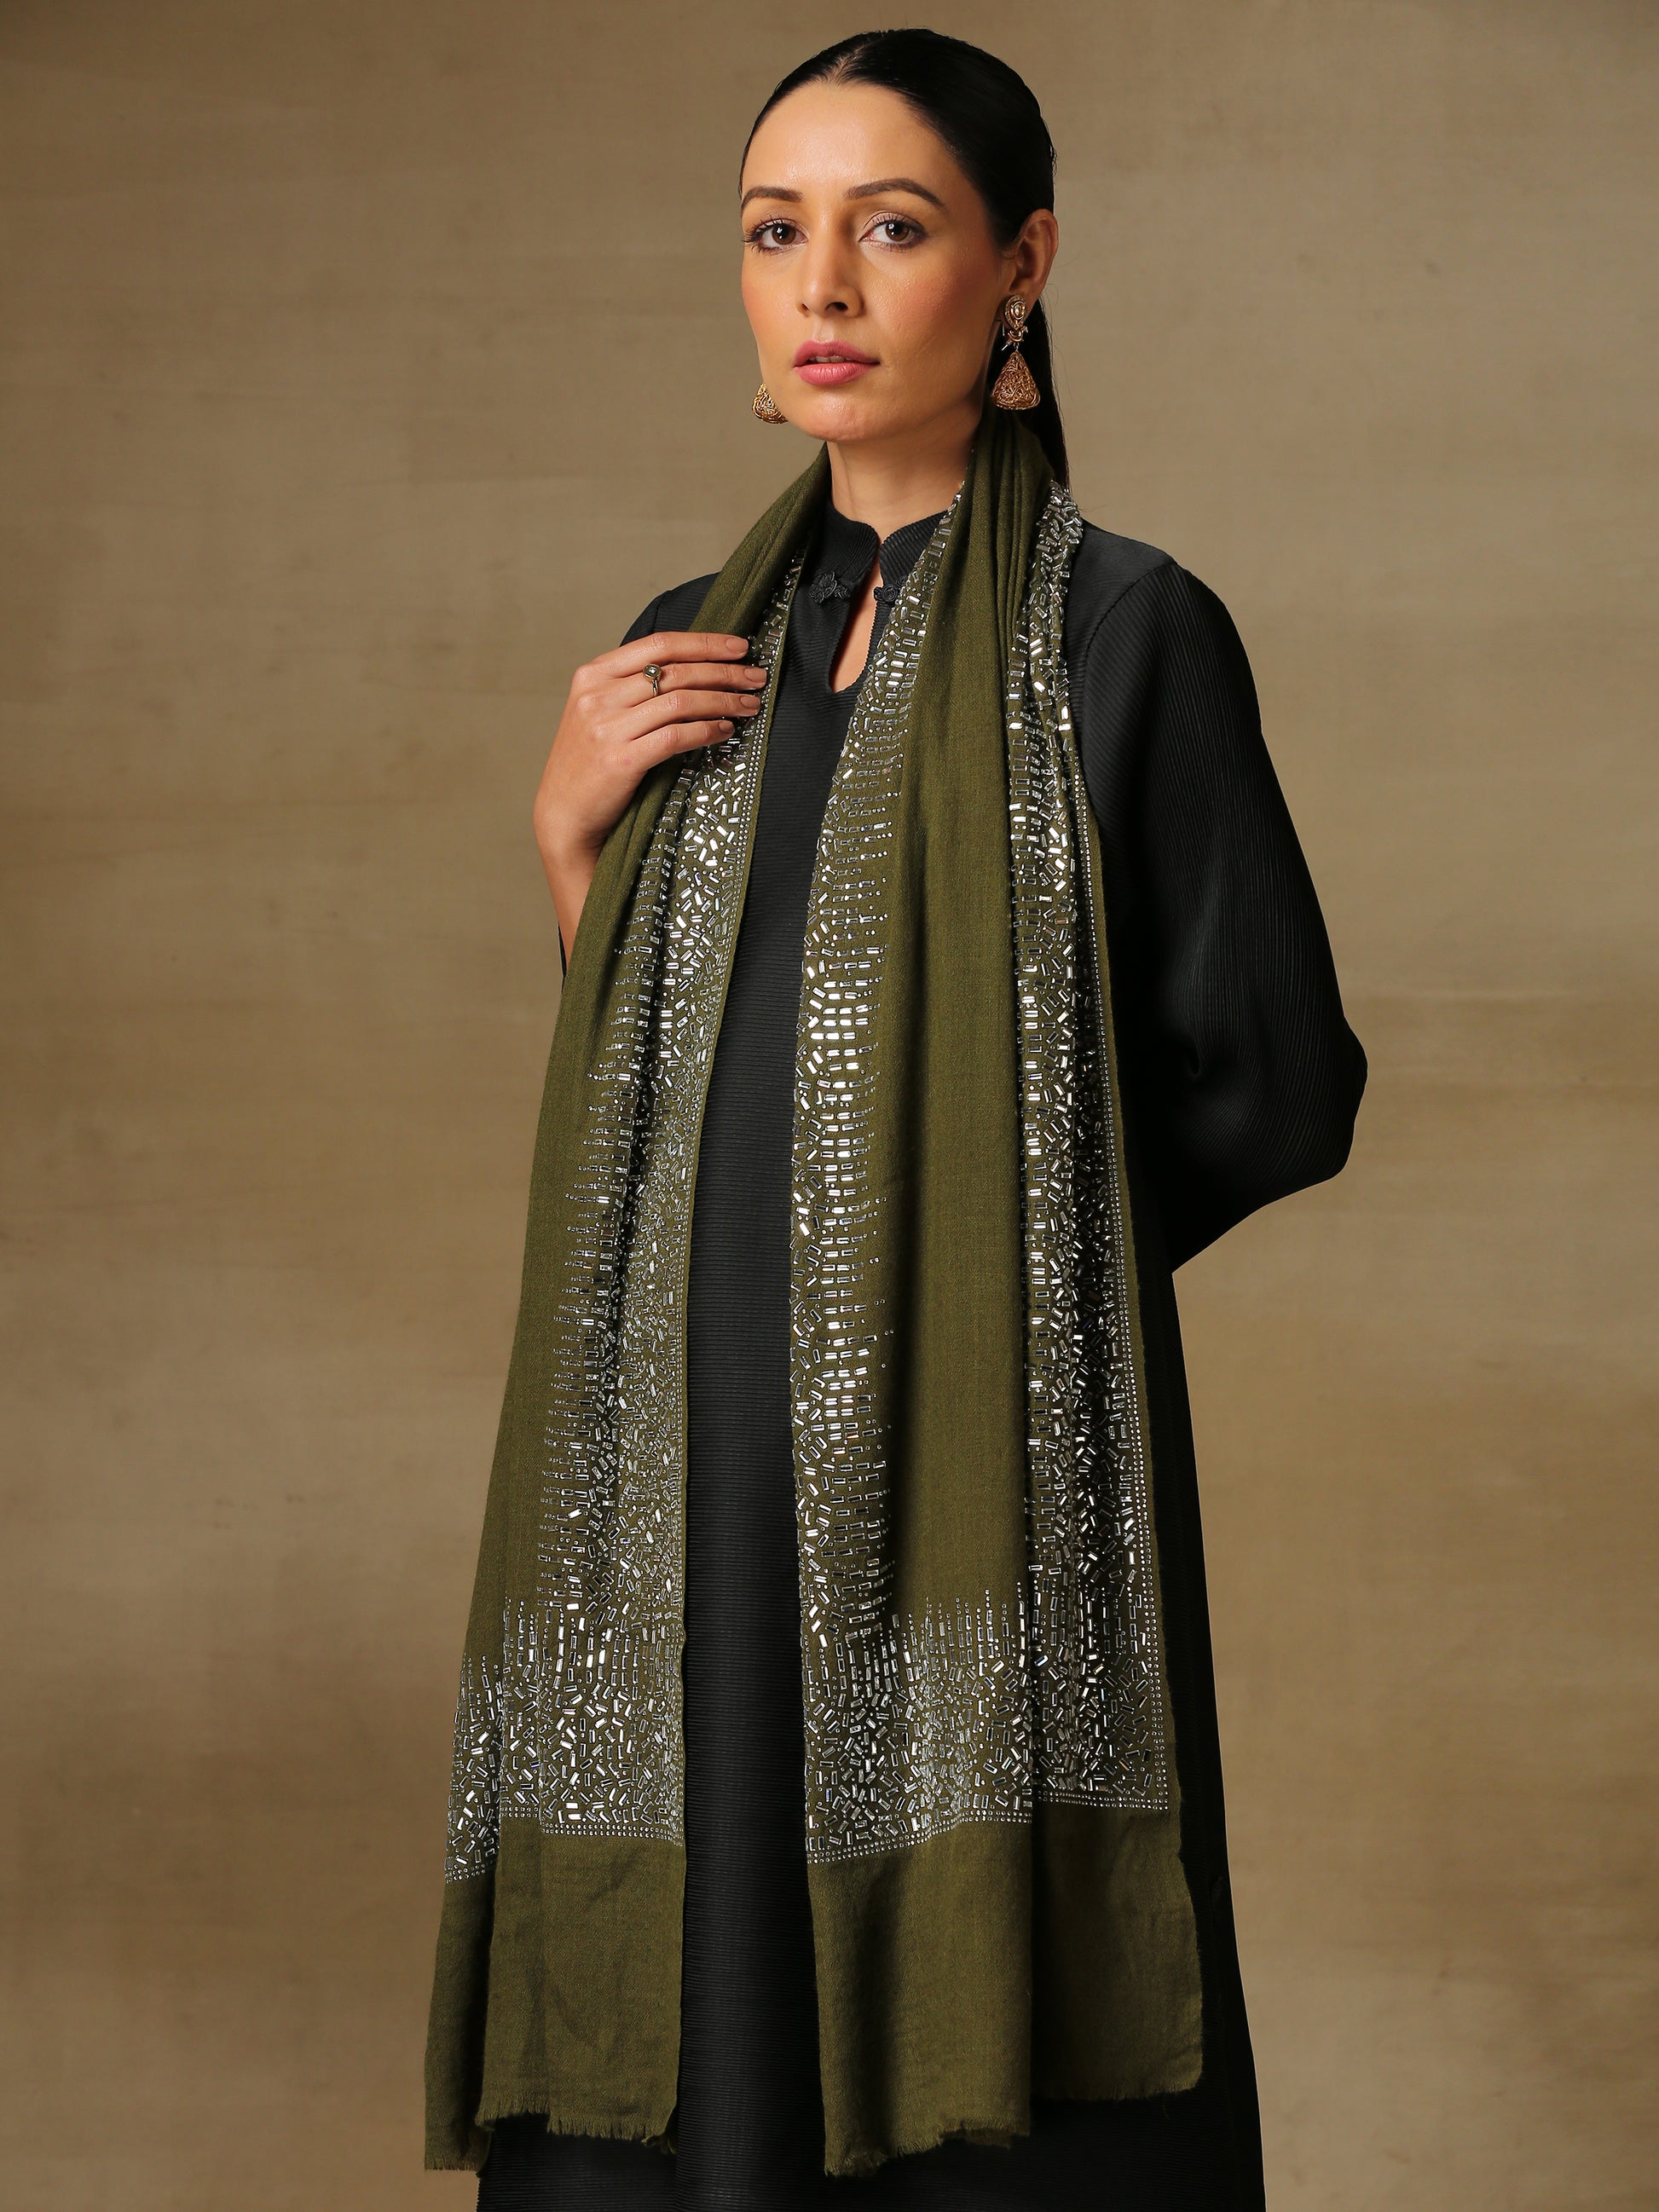 Model is wearing an olive coloured, swarovski studded stole from the Era of Zaywar Magnificent collection, with lavish hand embellished swarovski crystals all along the border. 